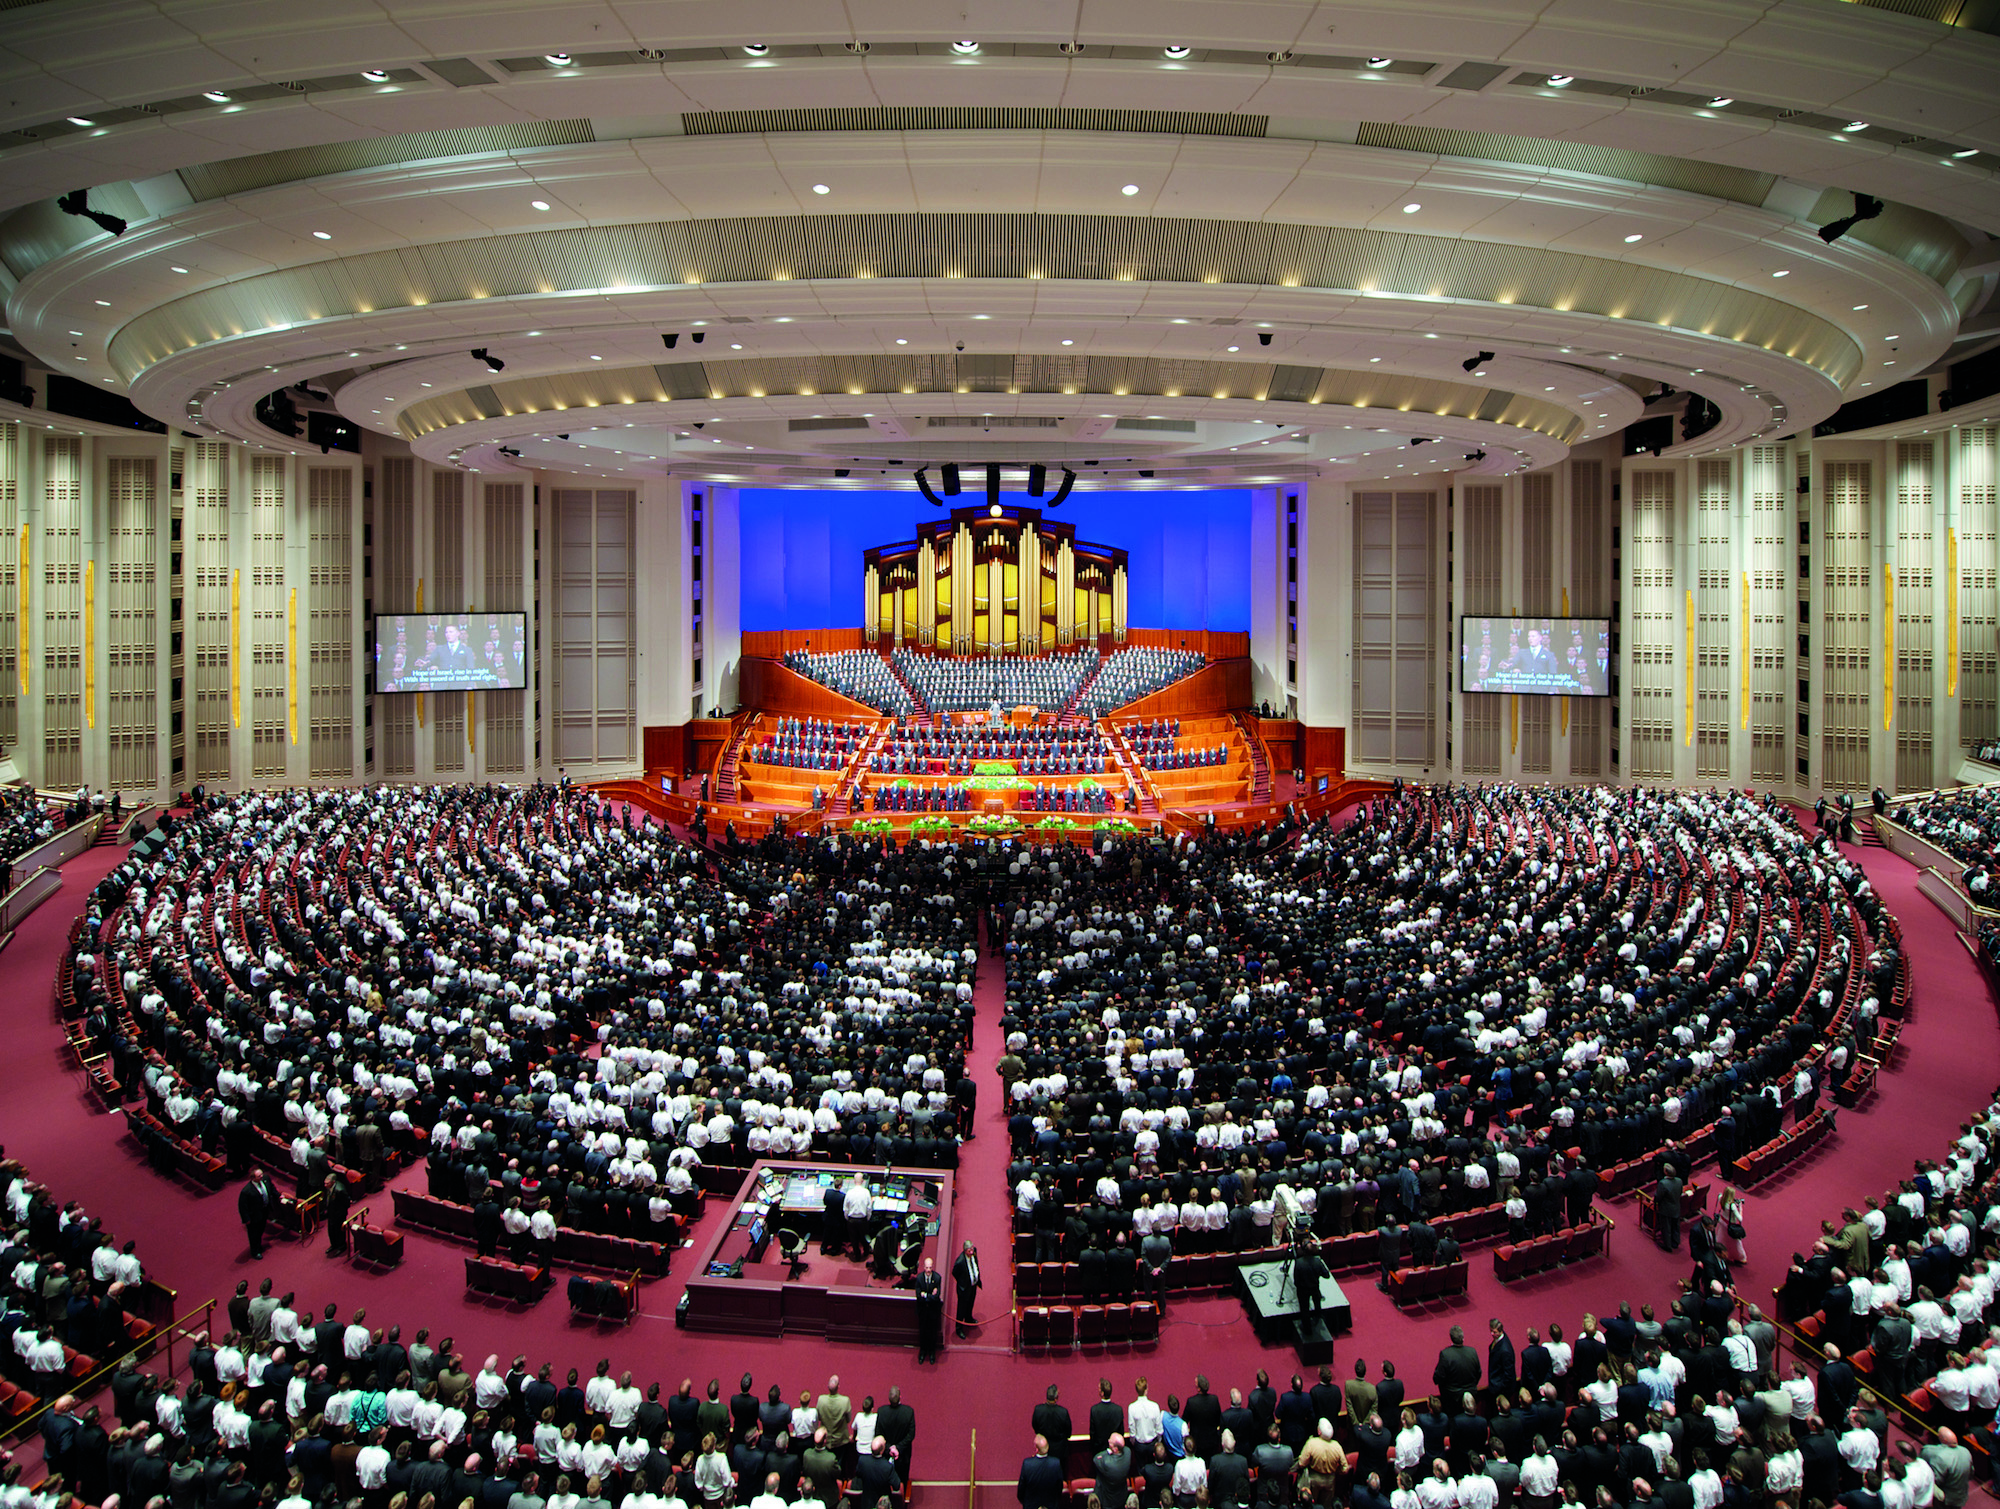 Mormonism in Pictures Preparing for a Worldwide General Conference